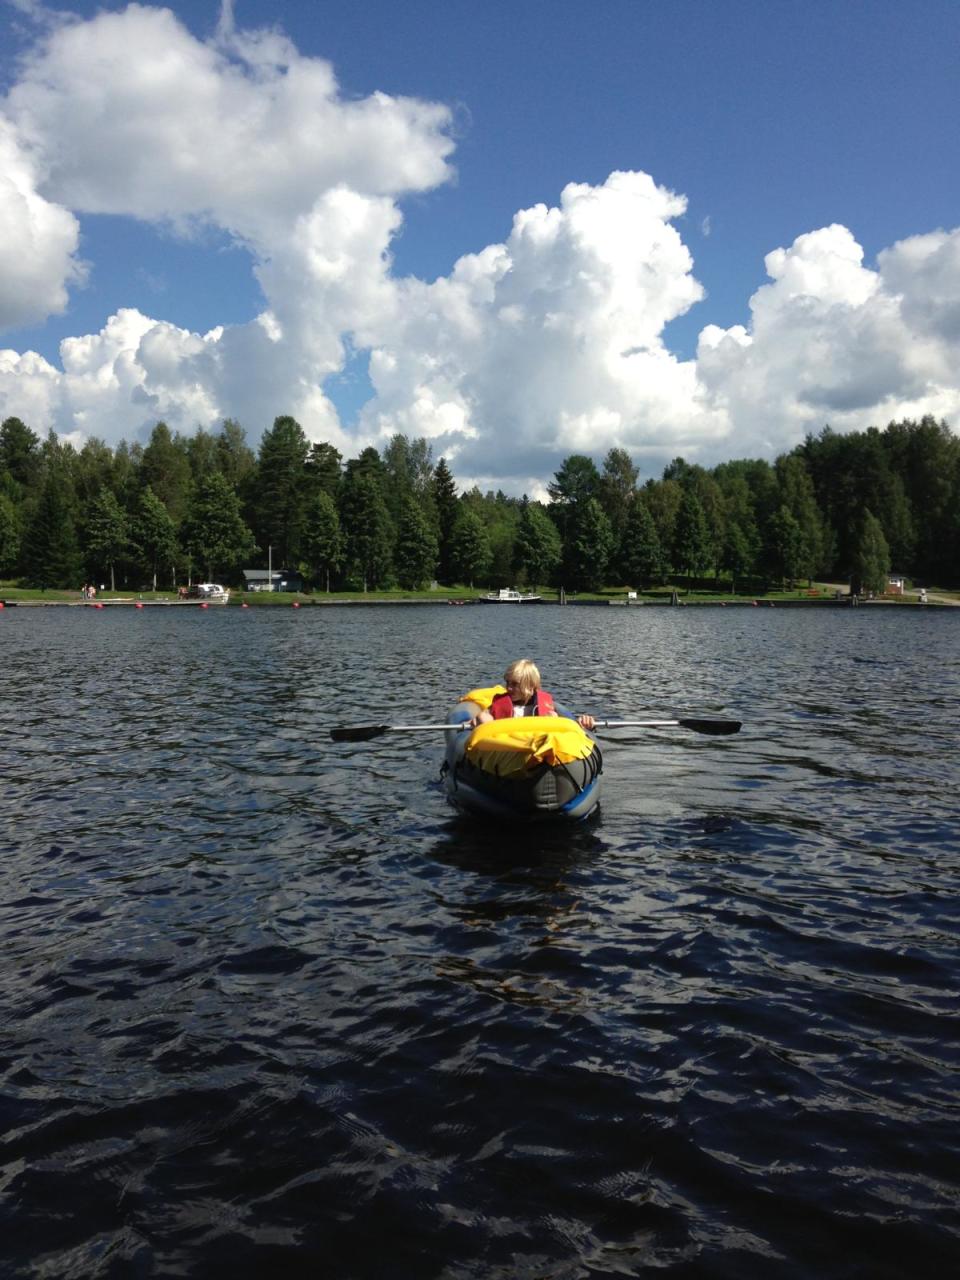 Oliver Russell kayaking on a lake in Finland.